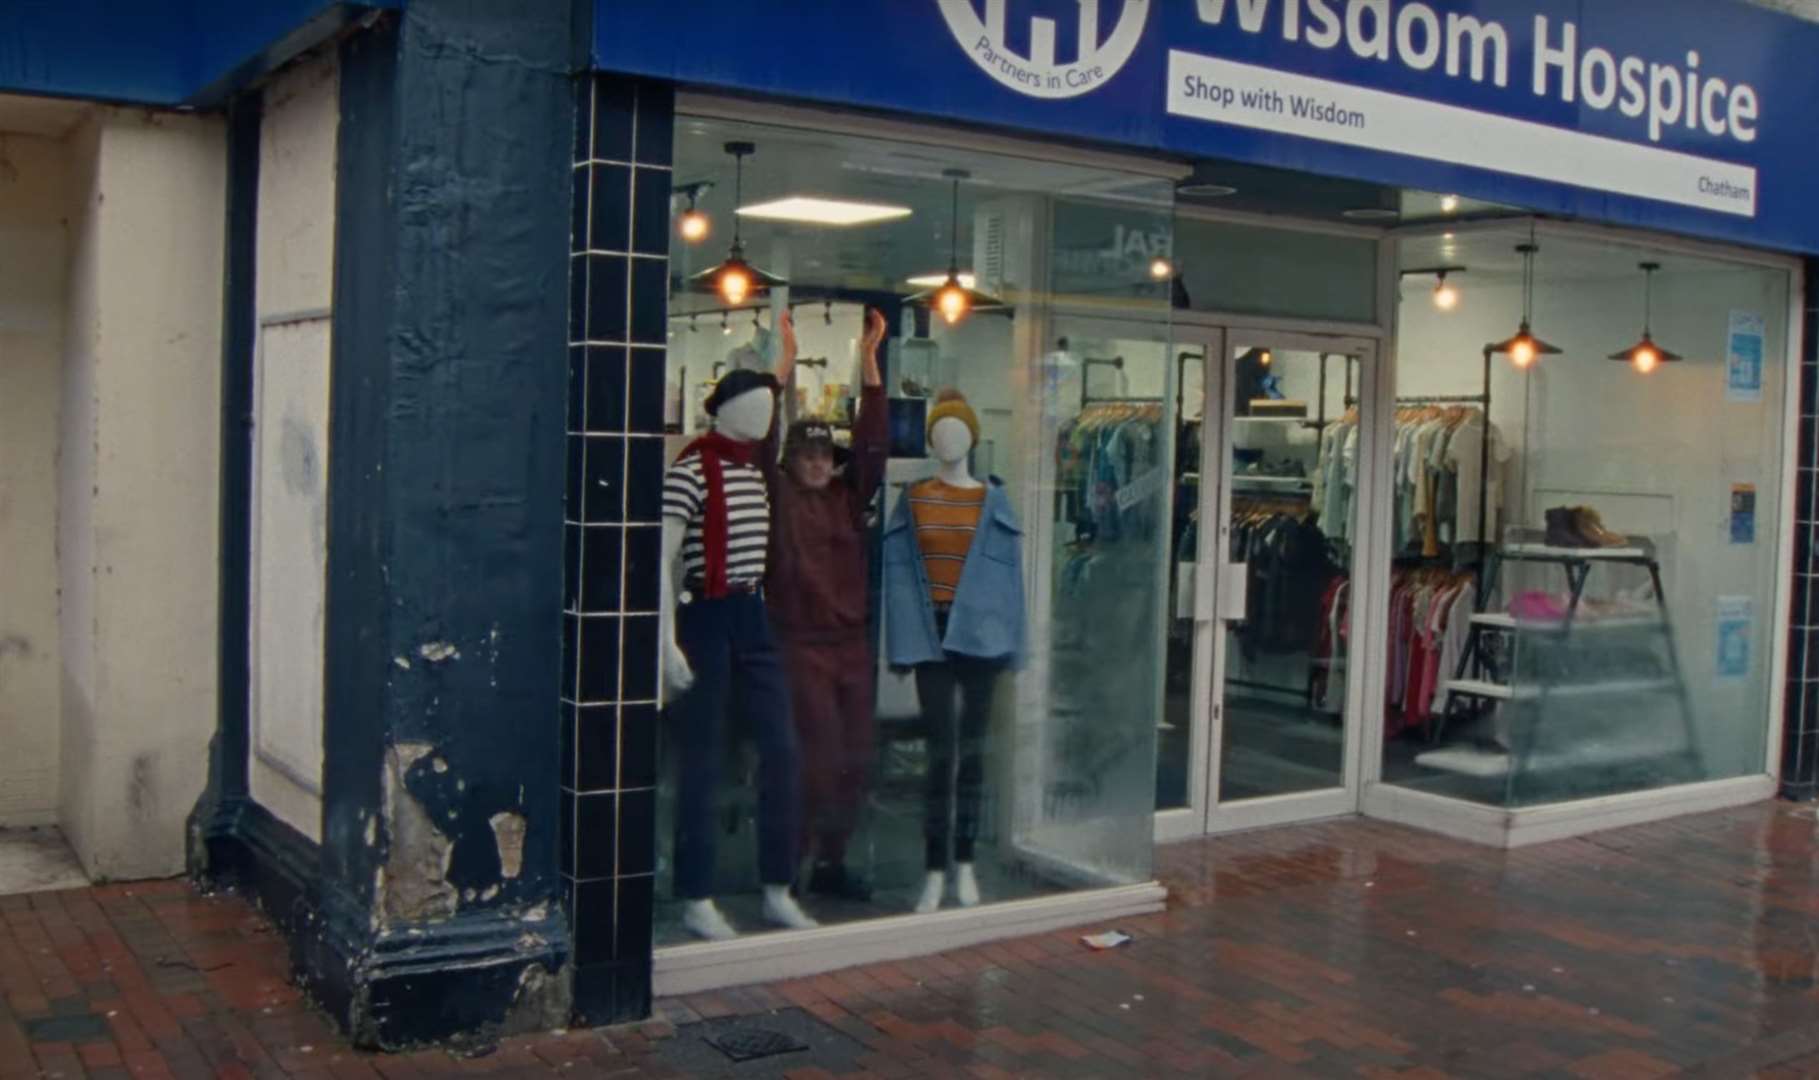 Singer venbee pictured in Chatham High Street, with Primark and charity store Wisdom Hospice. Picture: venbee/YouTube